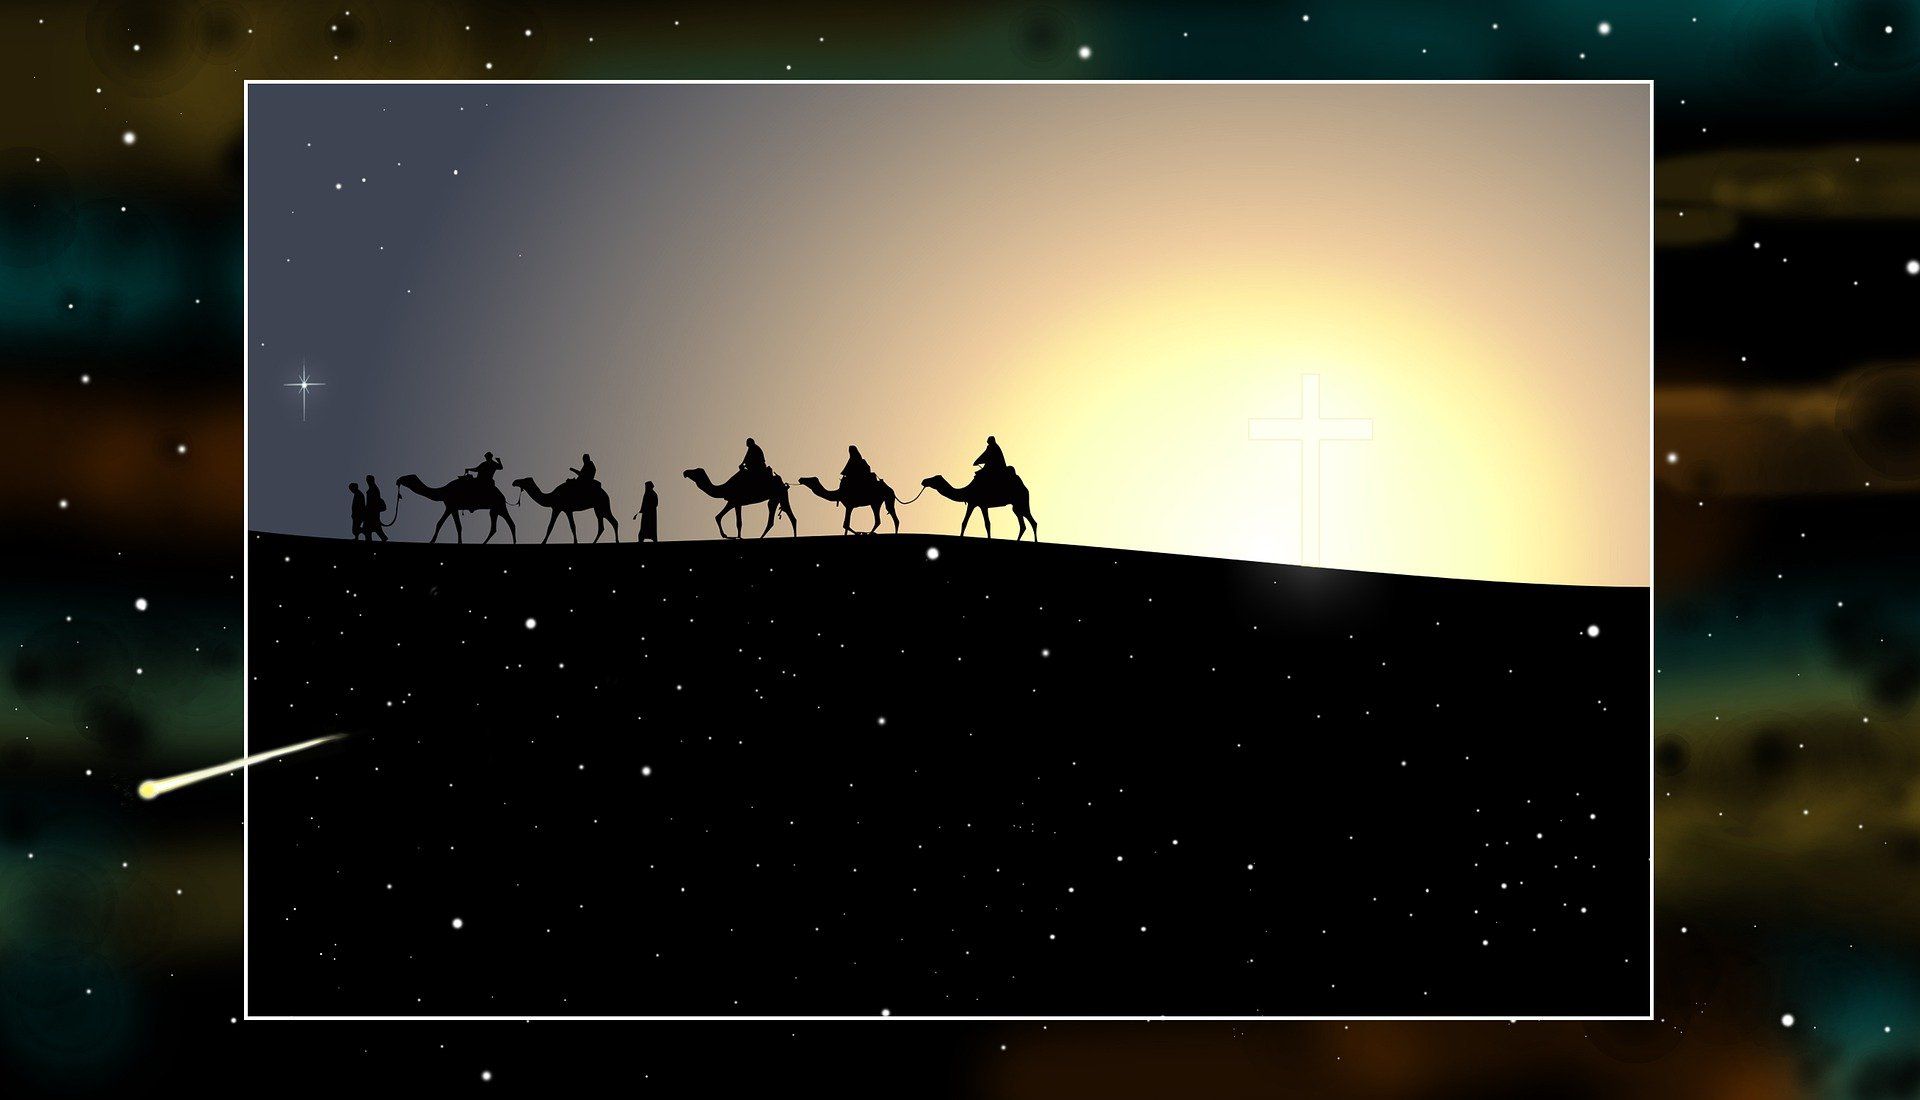 This is a picture of the wise men on their way to see Jesus